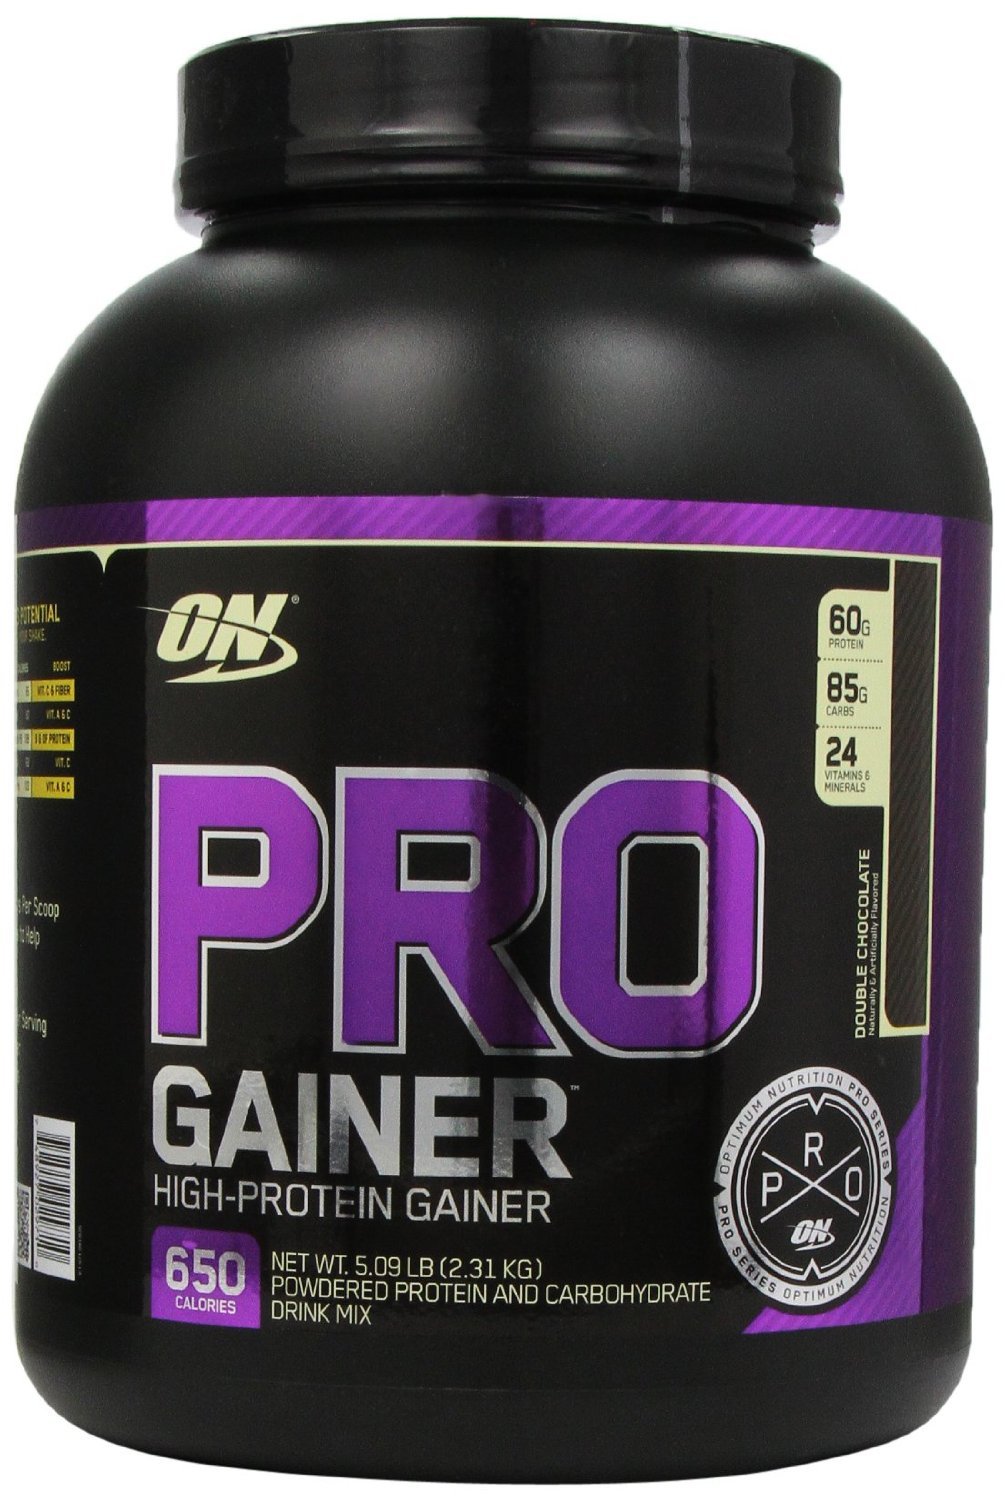 Pro Complex Gainer, 2310 g, Optimum Nutrition. Gainer. Mass Gain Energy & Endurance recovery 